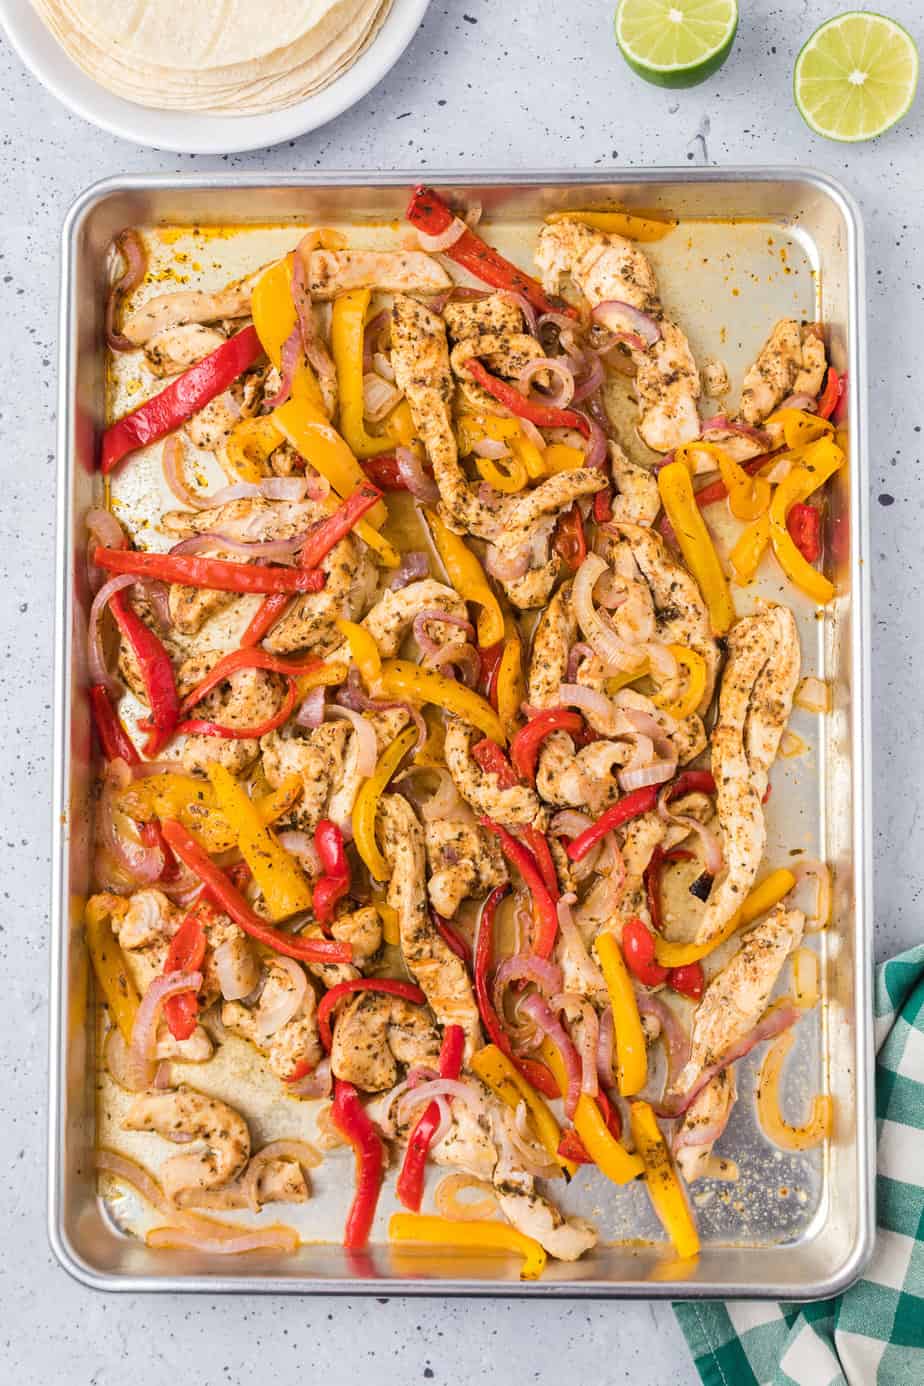 Juicy chicken fajitas with onions and bell peppers on a sheet pan cooked.